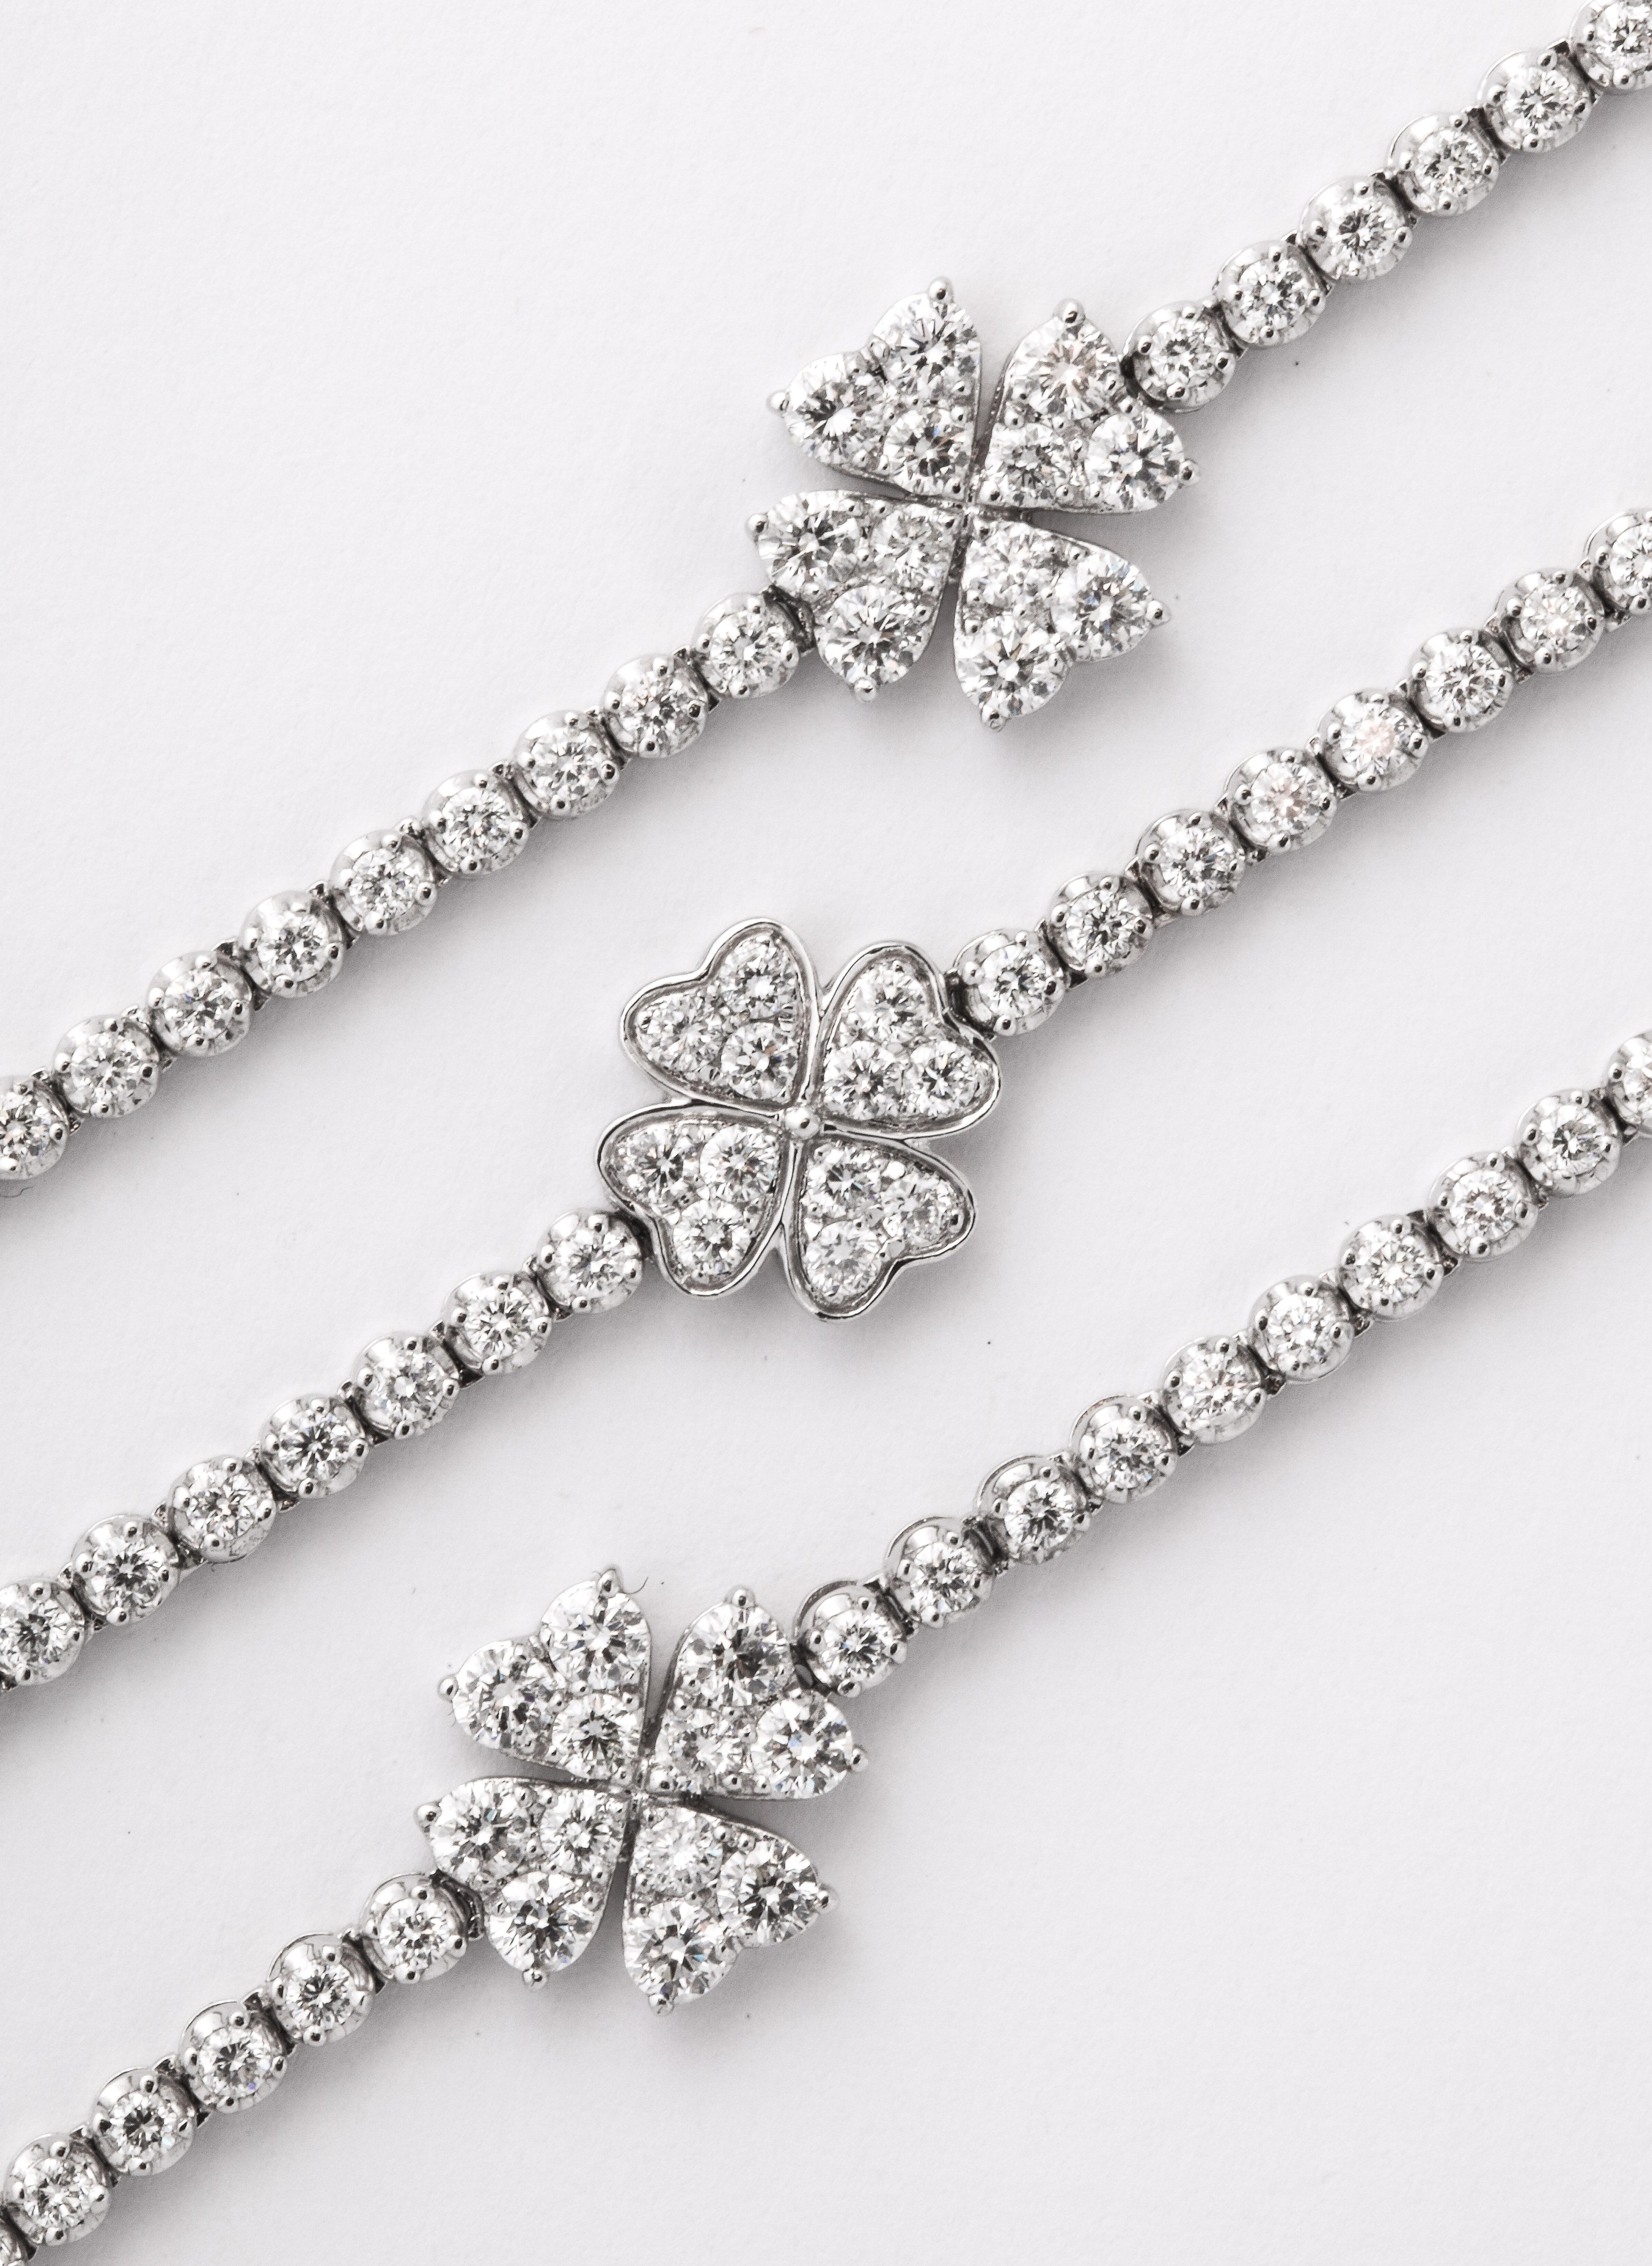 
Stunning on its own or layered with other pieces

12.76 carats of white round brilliant cut diamonds set in 18k white gold 

11 alternating diamond flower motifs with heart shaped petals 

29 inch length 